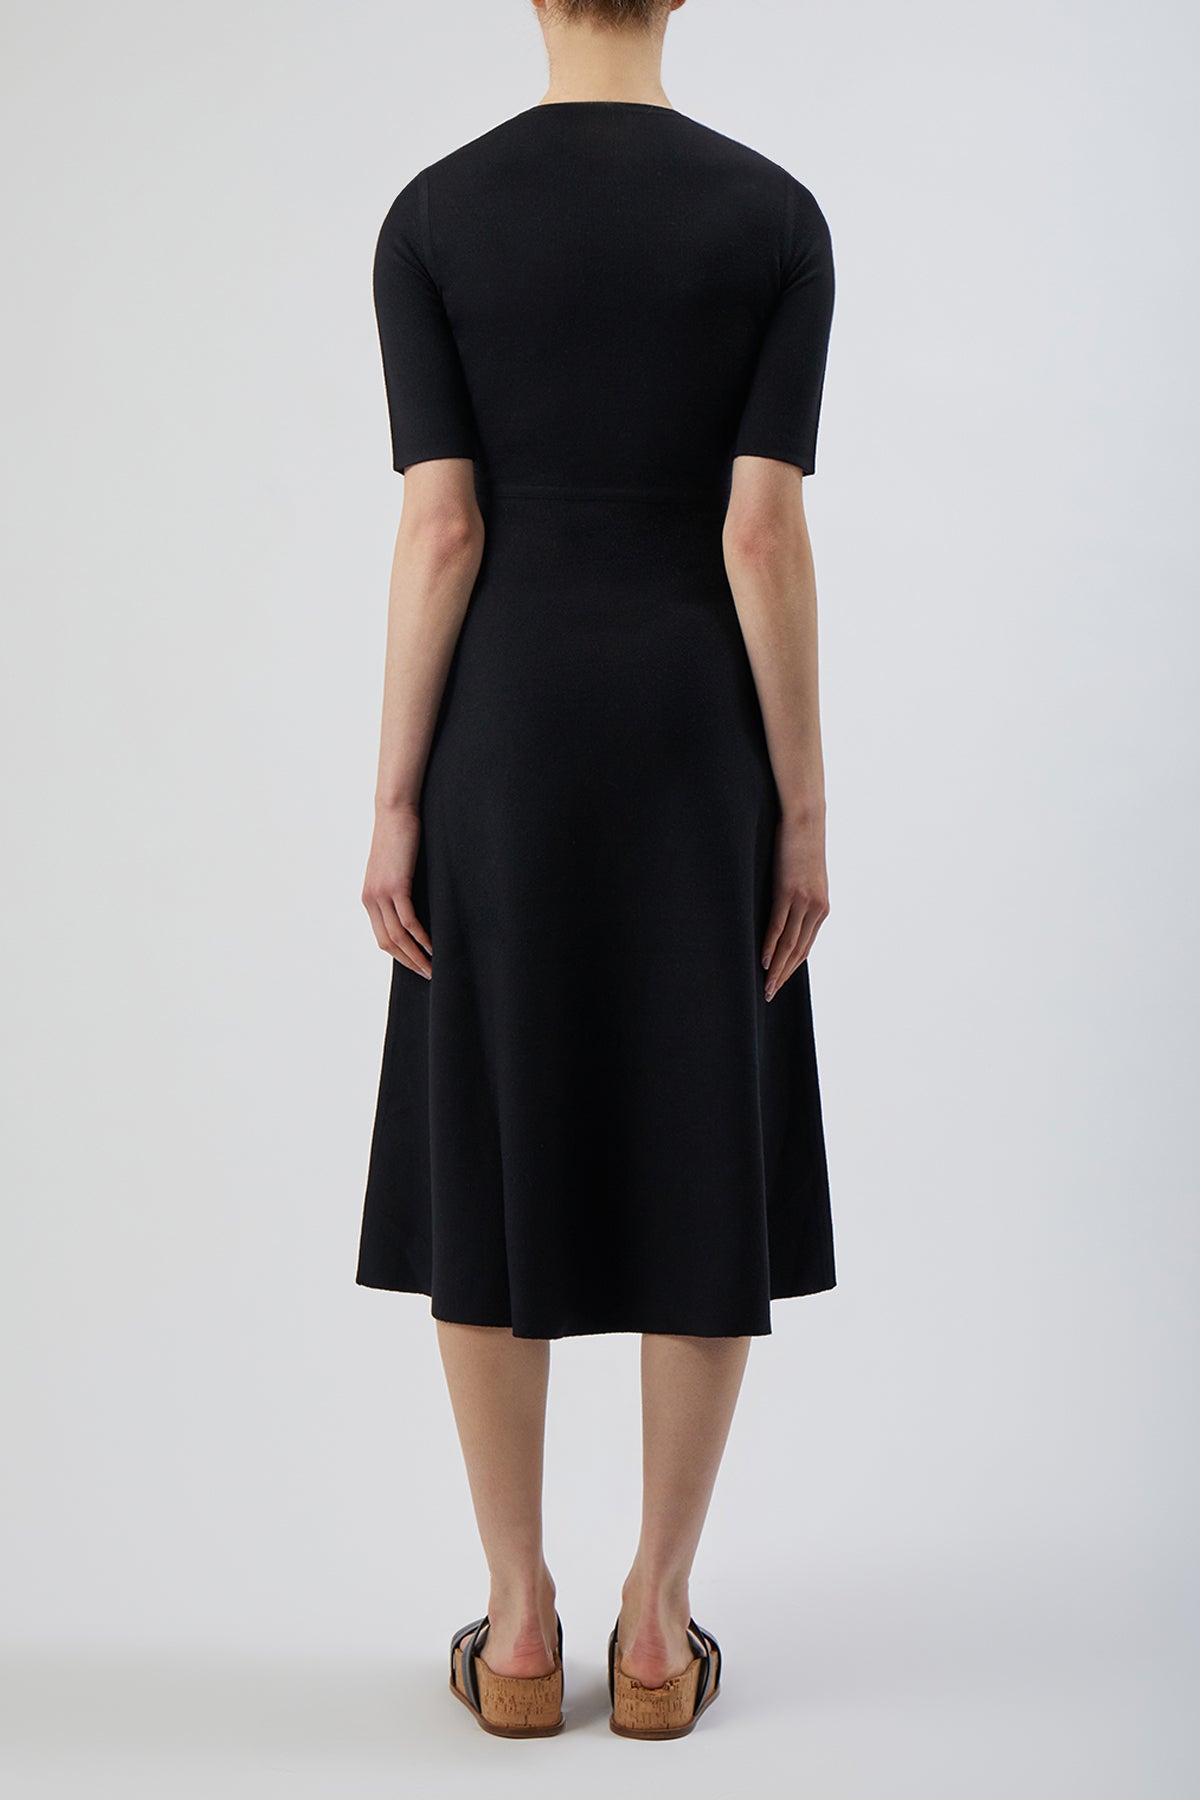 Seymore Dress in Black Cashmere Wool with Silk